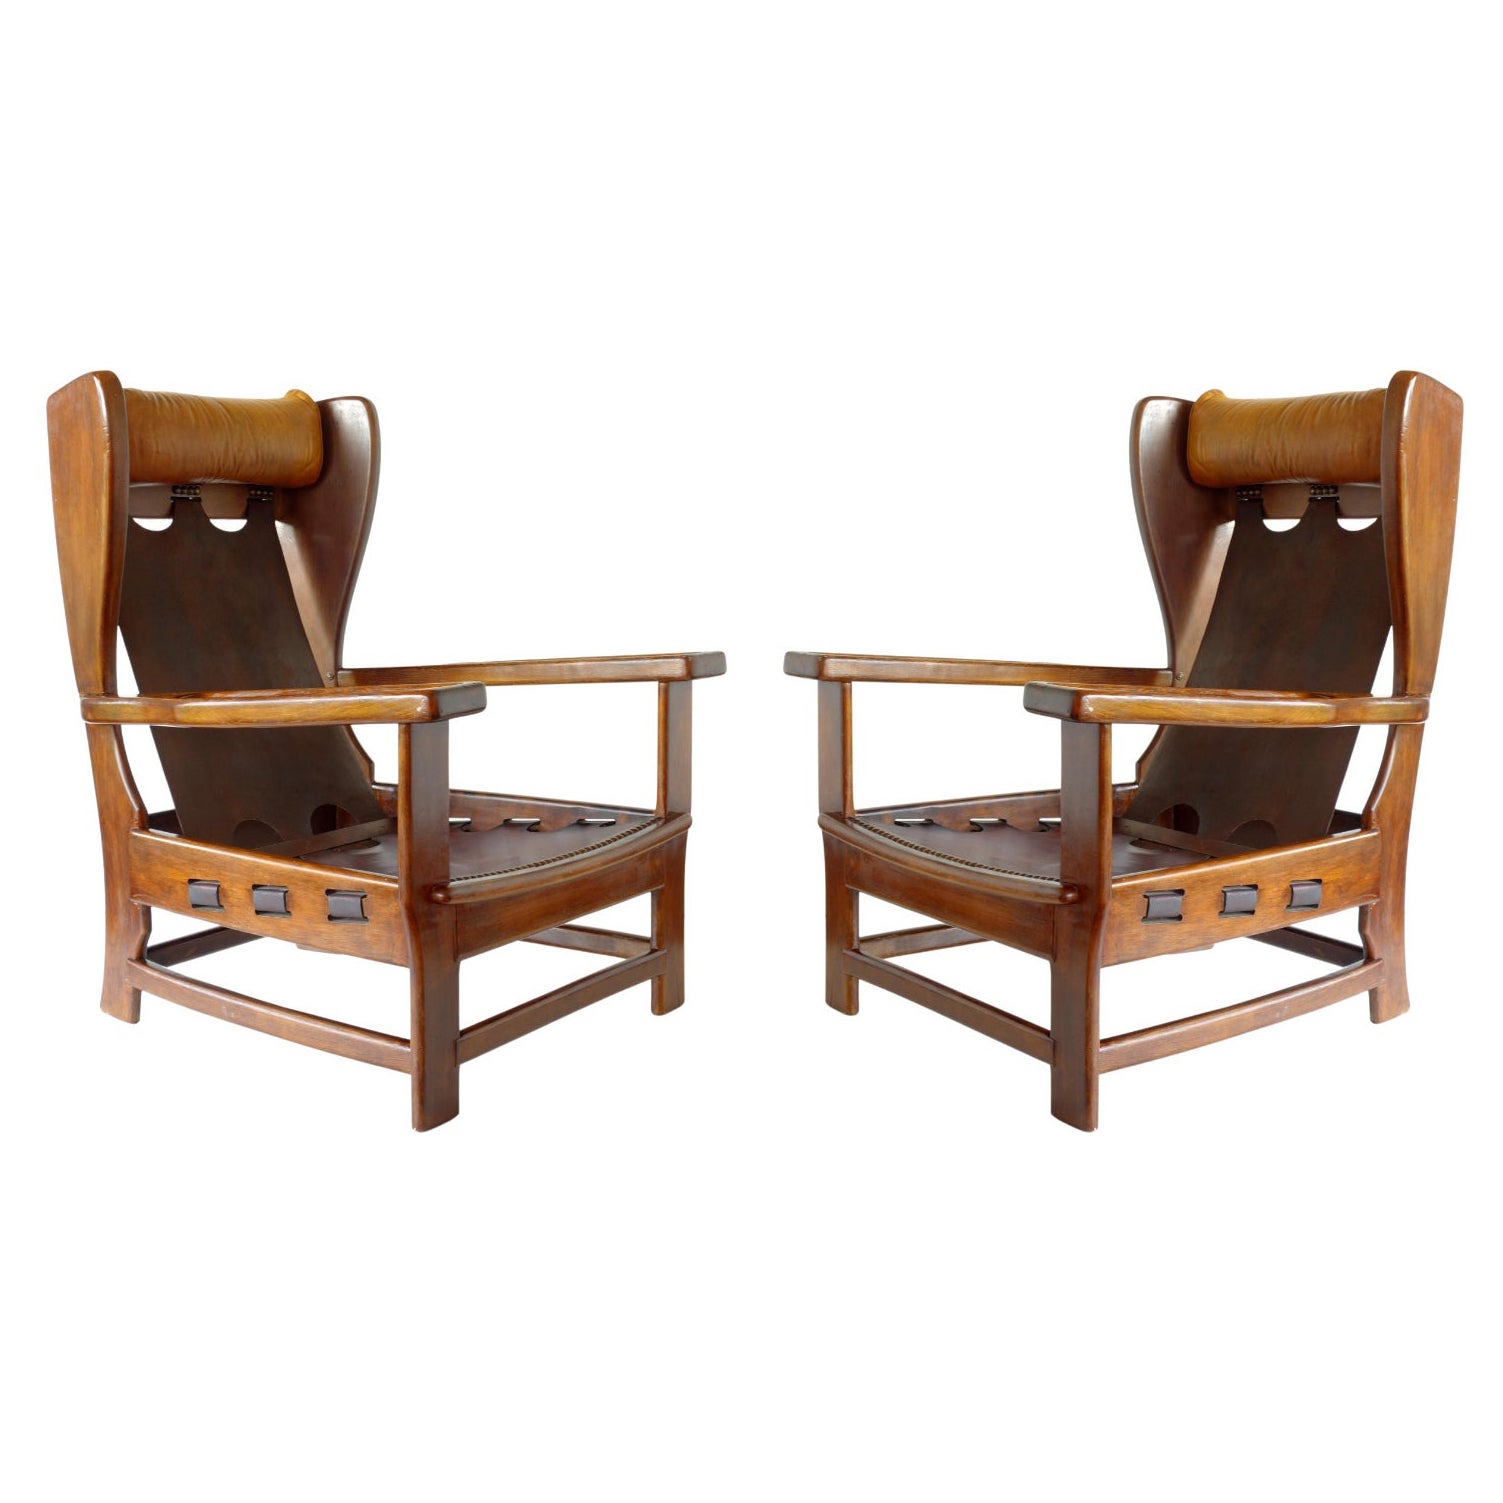 1960s Italian Design Leather and Wood Pair of Armchairs